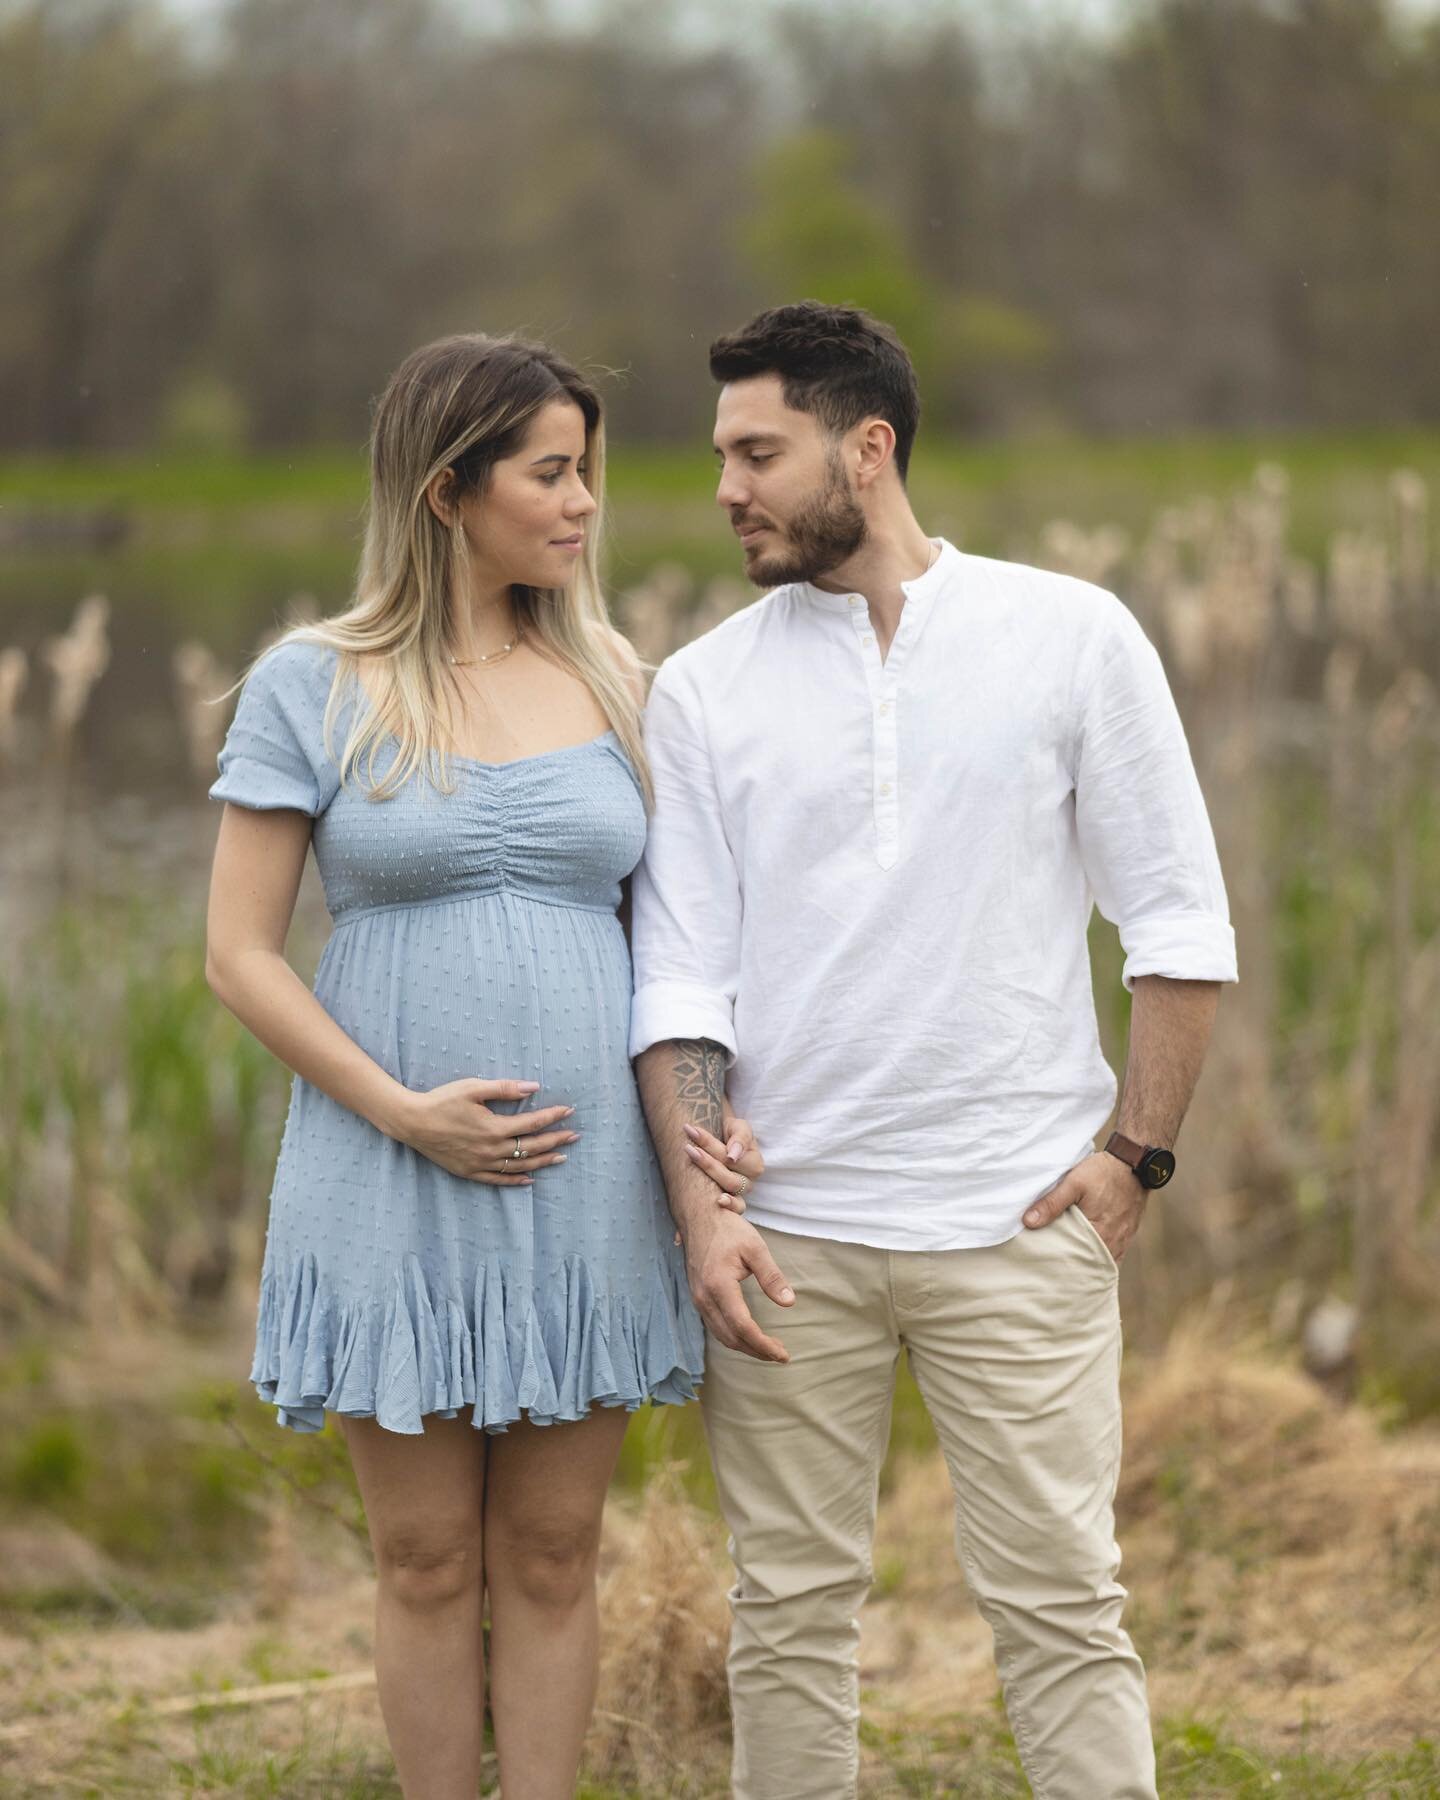 Thays and Bryan maternity shoot with a special guest&hellip; 

.
.
.
.
.
.

#2022wedding #bride #newjersey#njweddingphotographer#weddingphotography #engaged #weddinginspiration #sunmer2022  #bridetobe #weddingphotographer #weddingday #weddingphotogra